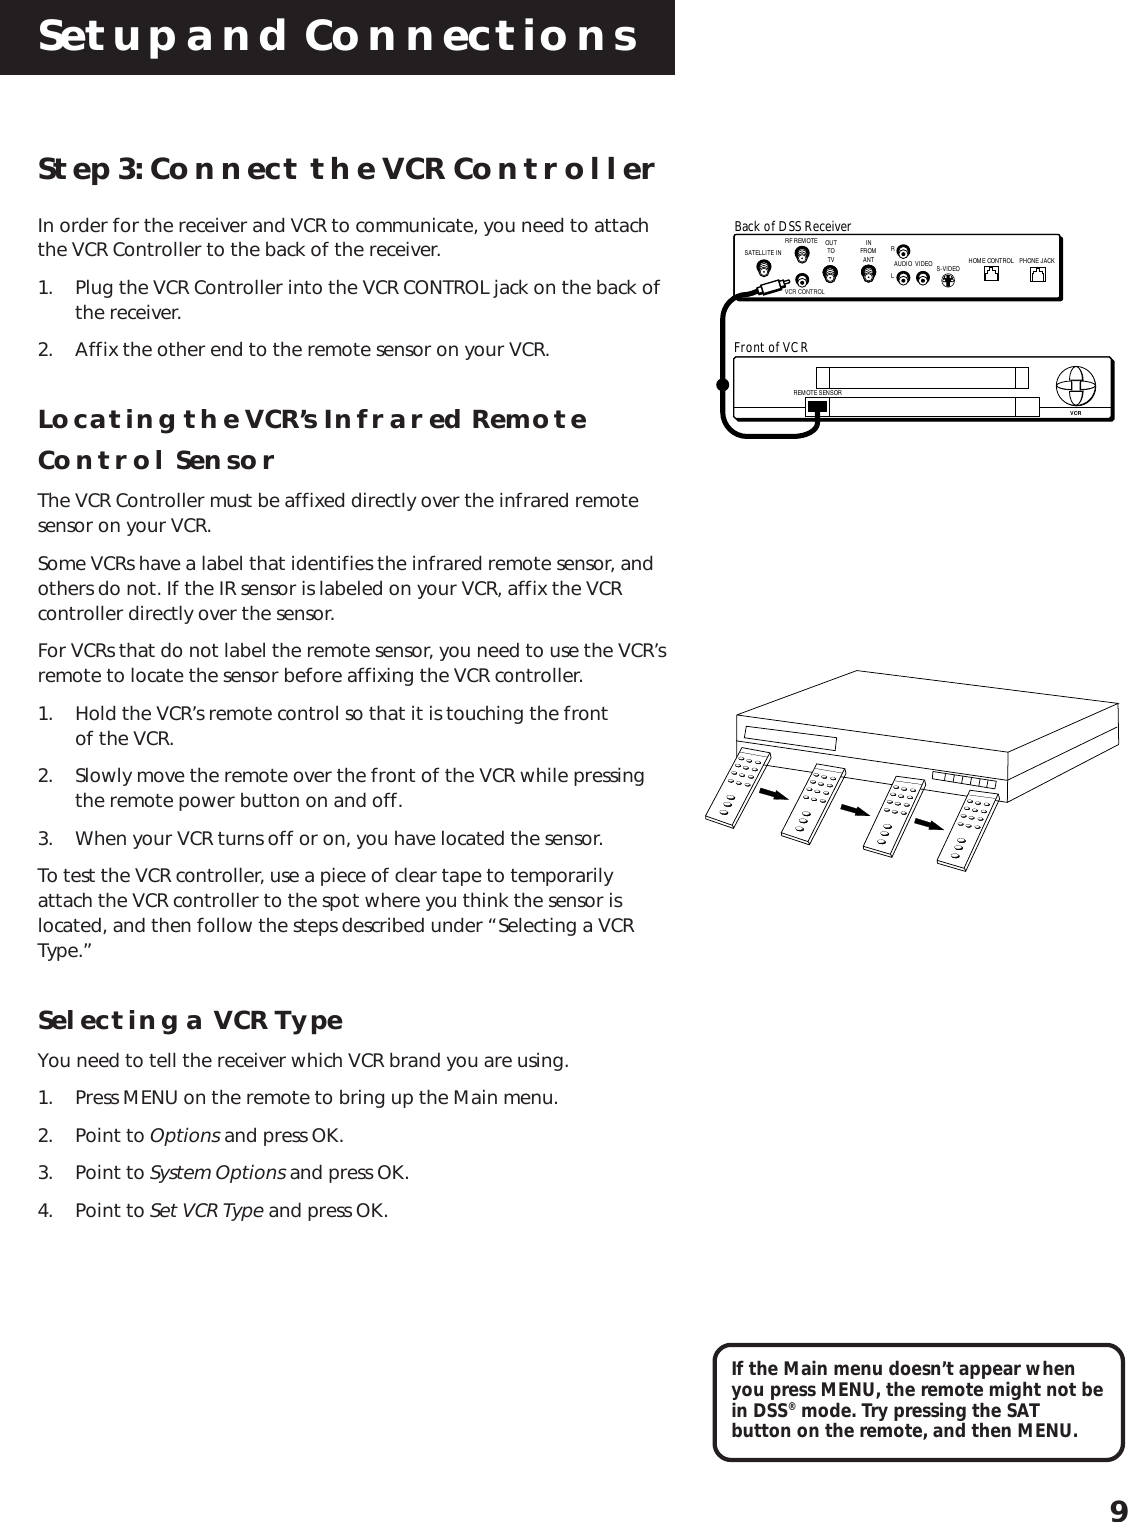 Setup and Connections9Step 3: Connect the VCR ControllerIn order for the receiver and VCR to communicate, you need to attachthe VCR Controller to the back of the receiver.1. Plug the VCR Controller into the VCR CONTROL jack on the back ofthe receiver.2. Affix the other end to the remote sensor on your VCR.Locating the VCR’s Infrared RemoteControl SensorThe VCR Controller must be affixed directly over the infrared remotesensor on your VCR.Some VCRs have a label that identifies the infrared remote sensor, andothers do not. If the IR sensor is labeled on your VCR, affix the VCRcontroller directly over the sensor.For VCRs that do not label the remote sensor, you need to use the VCR’sremote to locate the sensor before affixing the VCR controller.1. Hold the VCR’s remote control so that it is touching the frontof the VCR.2. Slowly move the remote over the front of the VCR while pressingthe remote power button on and off.3. When your VCR turns off or on, you have located the sensor.To test the VCR controller, use a piece of clear tape to temporarilyattach the VCR controller to the spot where you think the sensor islocated, and then follow the steps described under “Selecting a VCRType.”Selecting a VCR TypeYou need to tell the receiver which VCR brand you are using.1. Press MENU on the remote to bring up the Main menu.2. Point to Options and press OK.3. Point to System Options and press OK.4. Point to Set VCR Type and press OK.If the Main menu doesn’t appear whenyou press MENU, the remote might not bein DSS® mode. Try pressing the SATbutton on the remote, and then MENU.REMOTE SENSORVCRFront of VCRBack of DSS ReceiverSATELLITE INOUTTOTVRF REMOTES-VIDEOVIDEORLAUDIO HOME CONTROLVCR CONTROLINFROMANT PHONE JACK